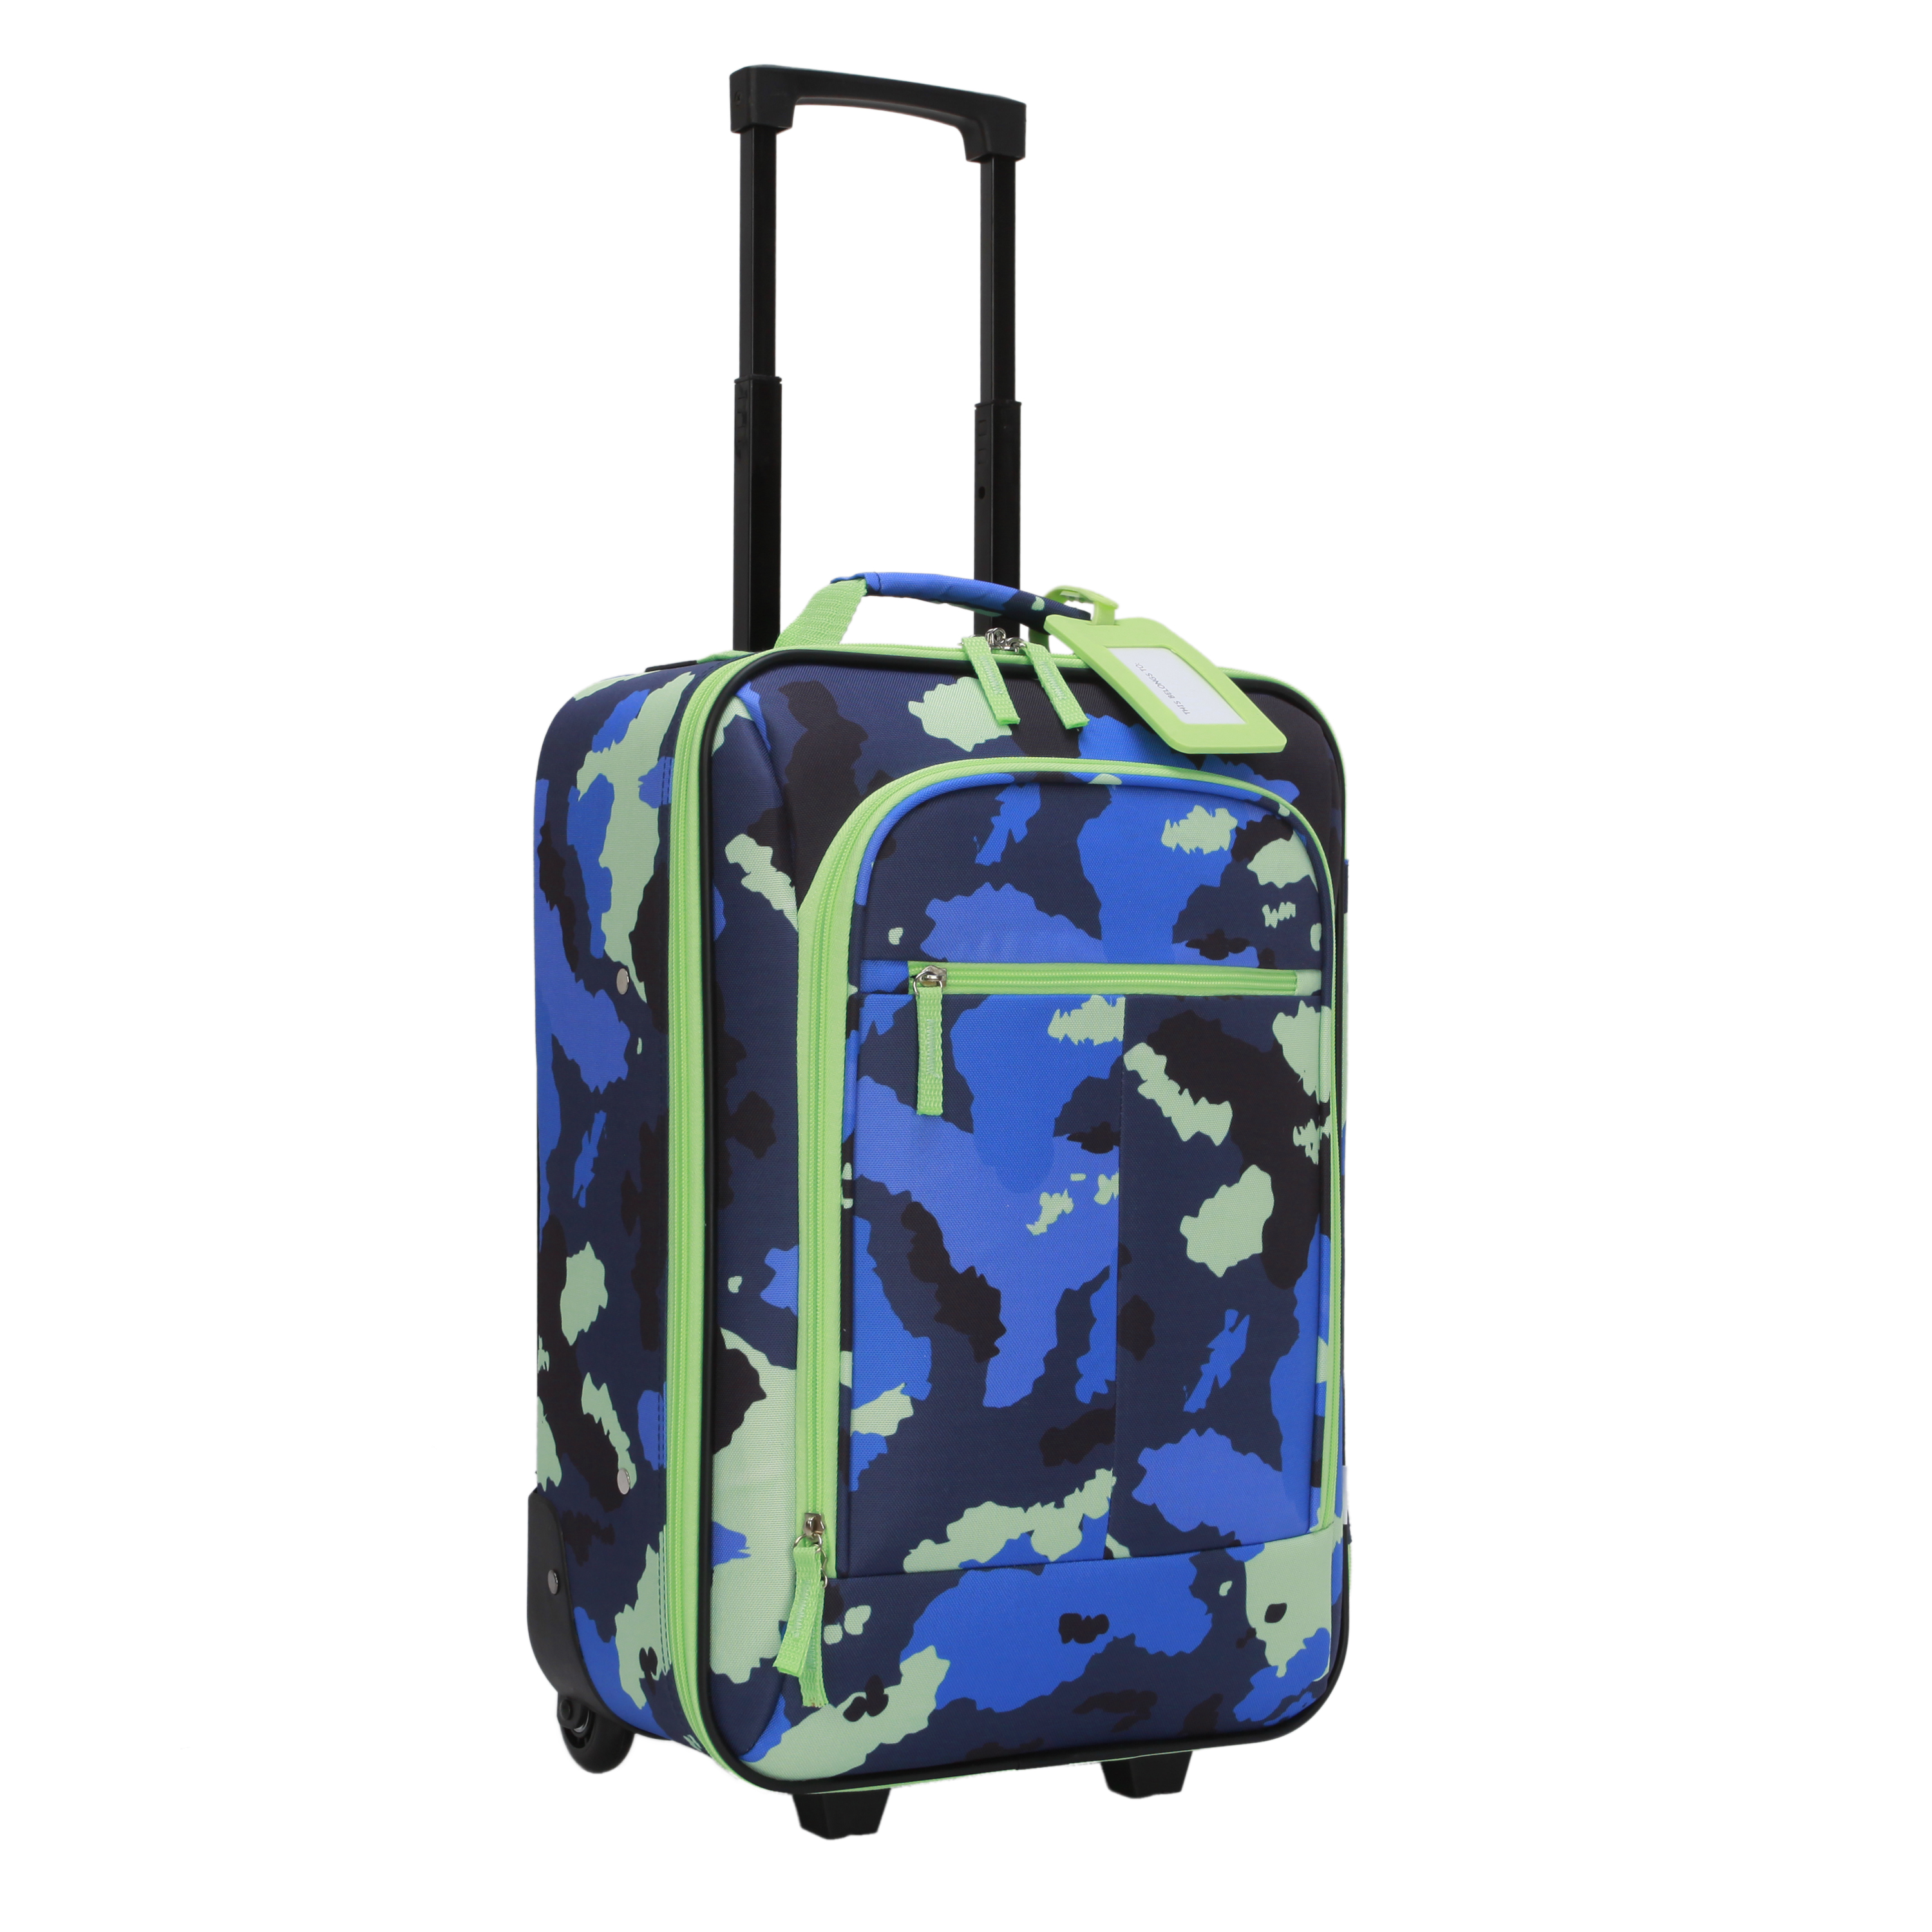 CRCKT 4 Piece 18-inch Soft side Carry-on Kids Luggage Set, Blue Camo - image 3 of 23